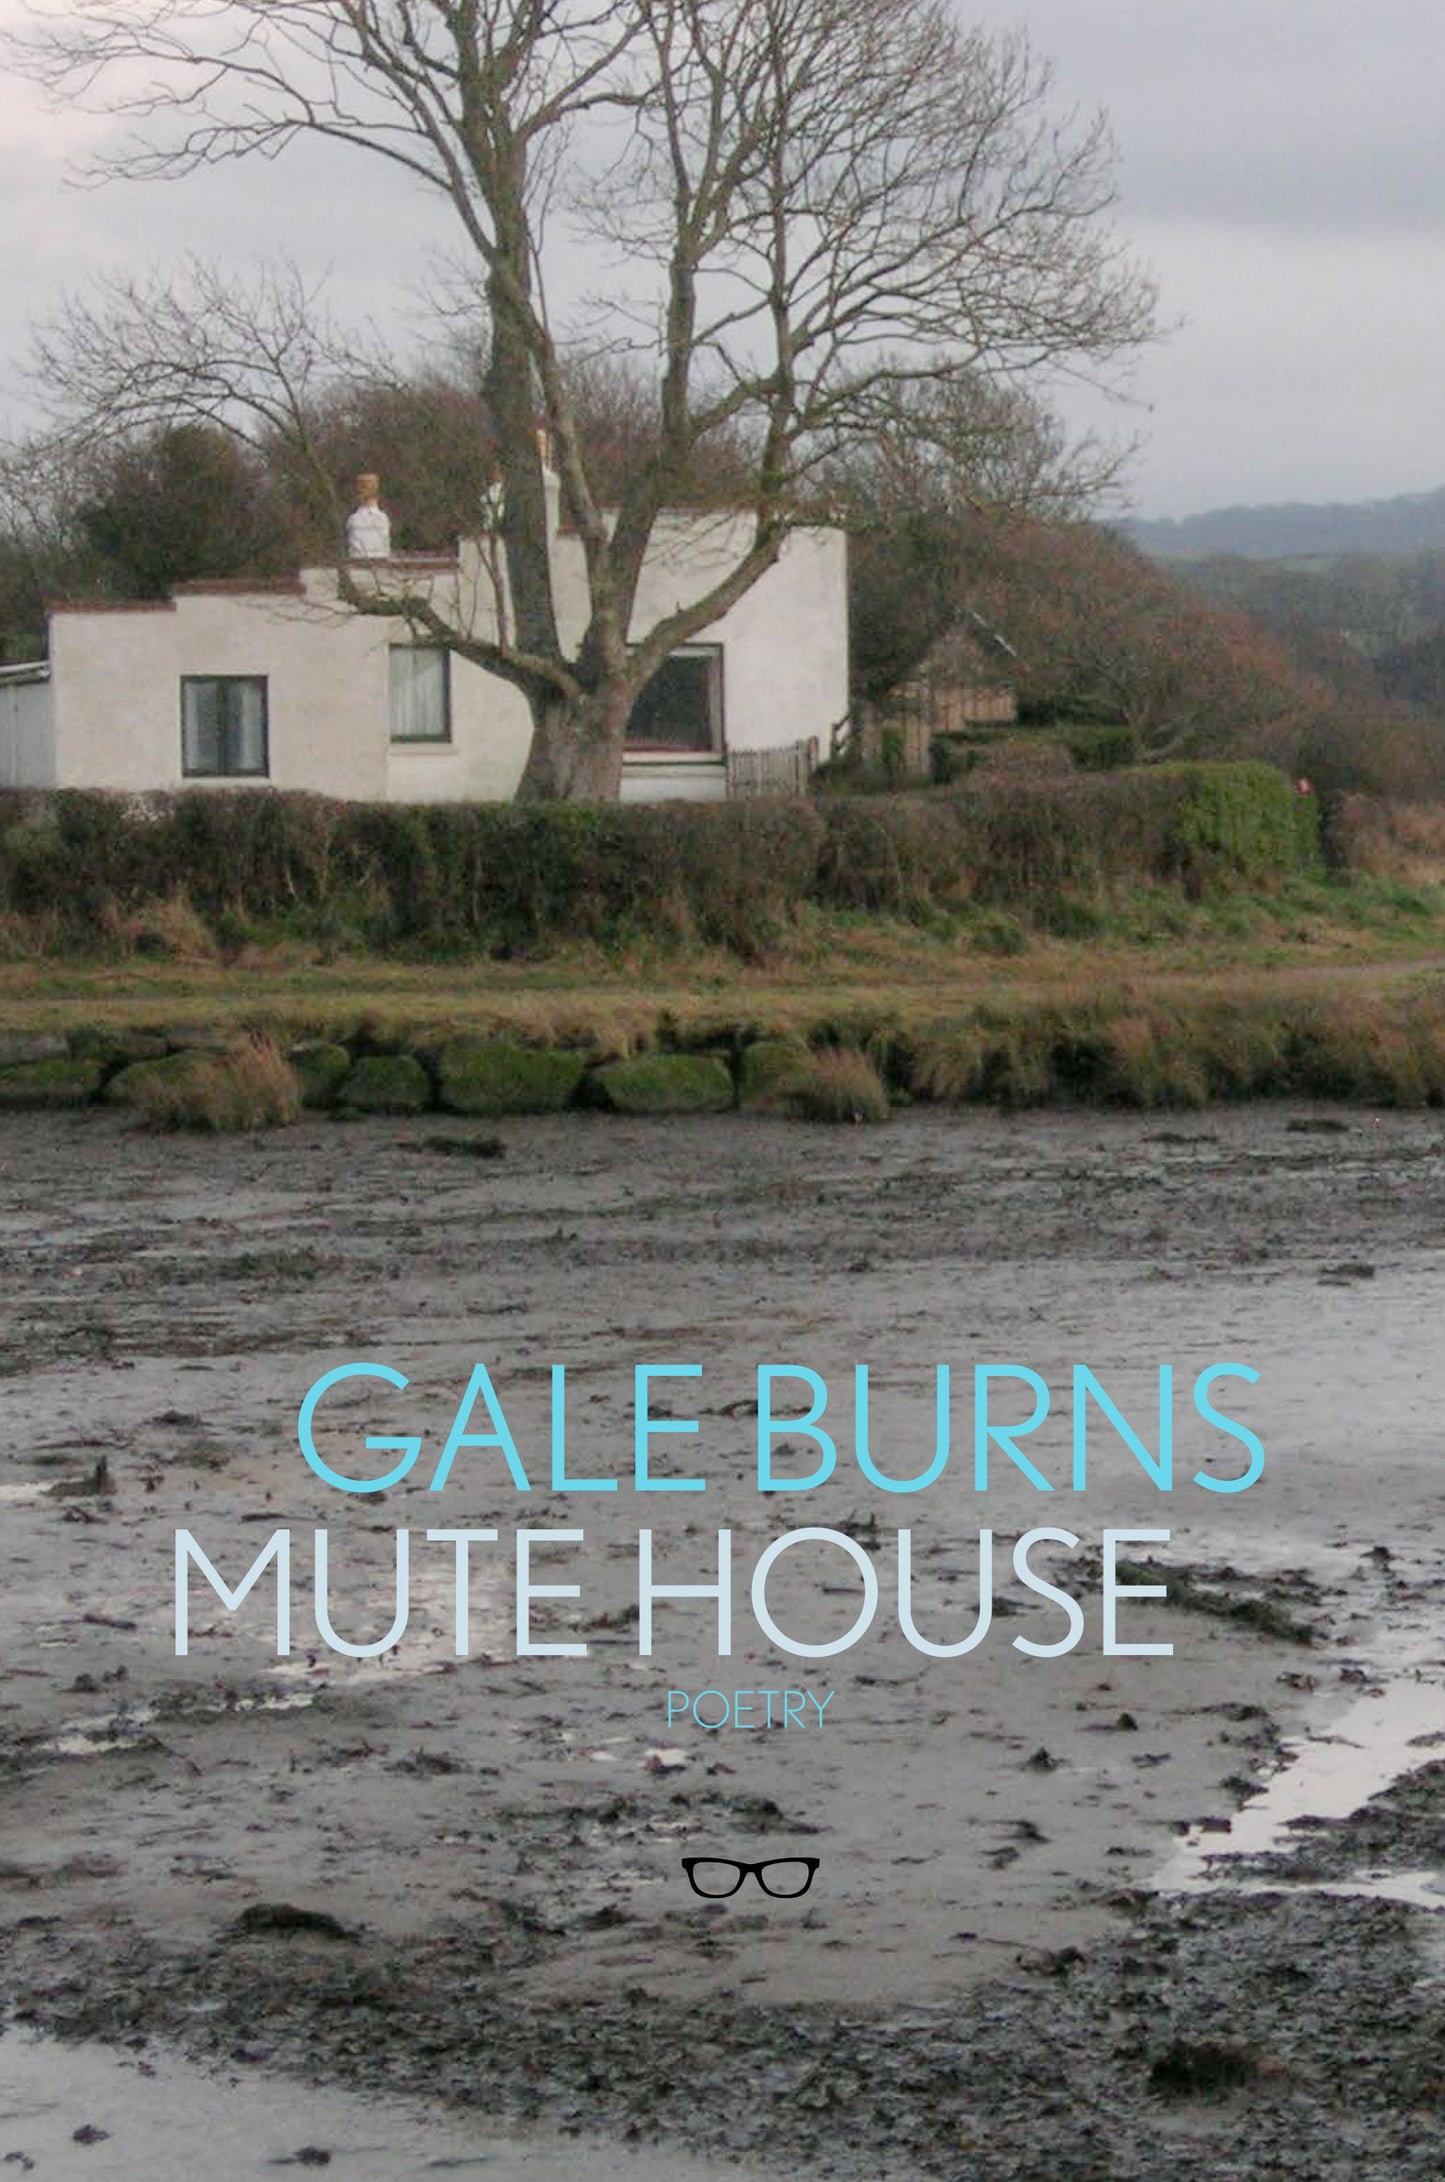 MUTE HOUSE by GALE BURNS